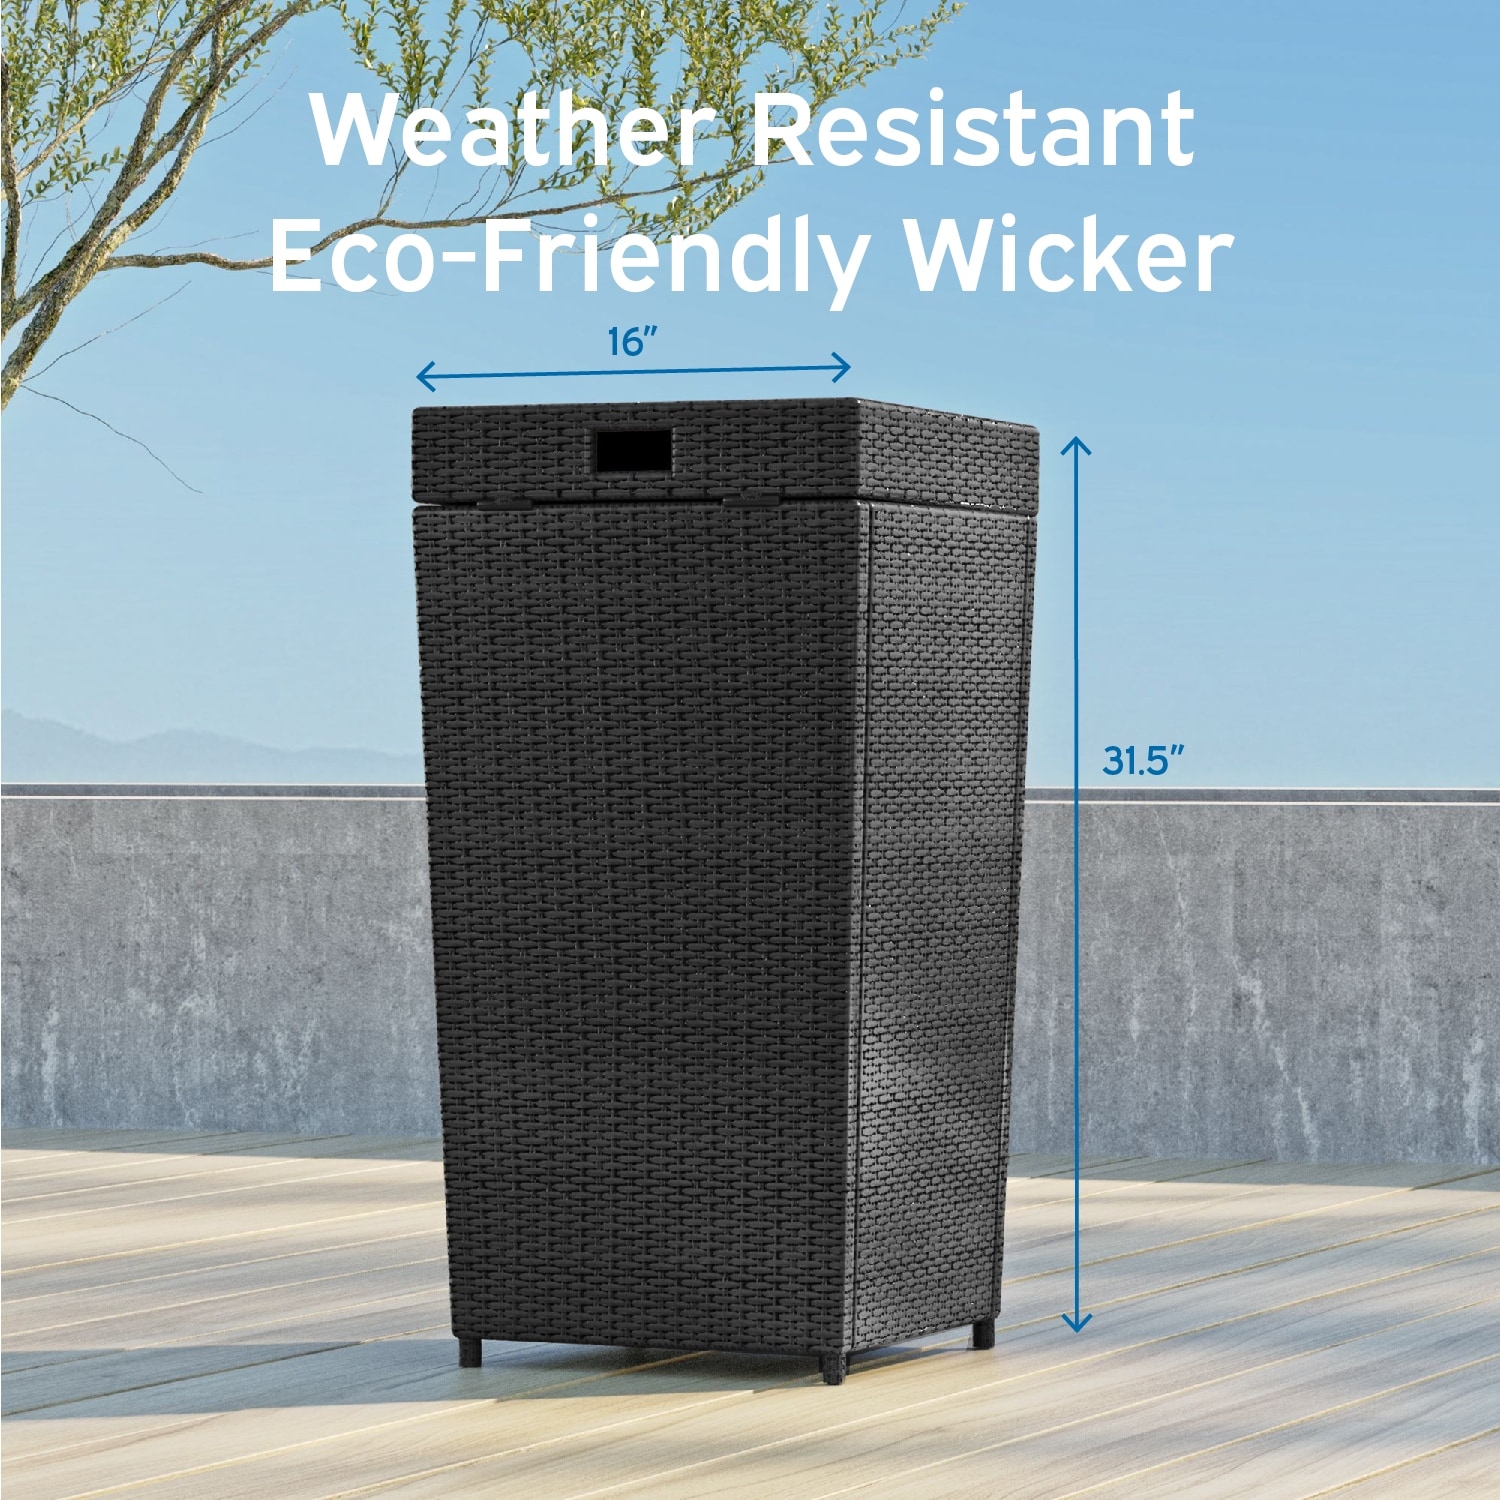 https://ak1.ostkcdn.com/images/products/is/images/direct/8dcefba3b2f1e721122f991df55d9af6439928f3/Nestl-Outdoor-Trash-Can-with-Lid---30-Gallon-Durable-Wicker-Garbage-Can-for-Patio.jpg